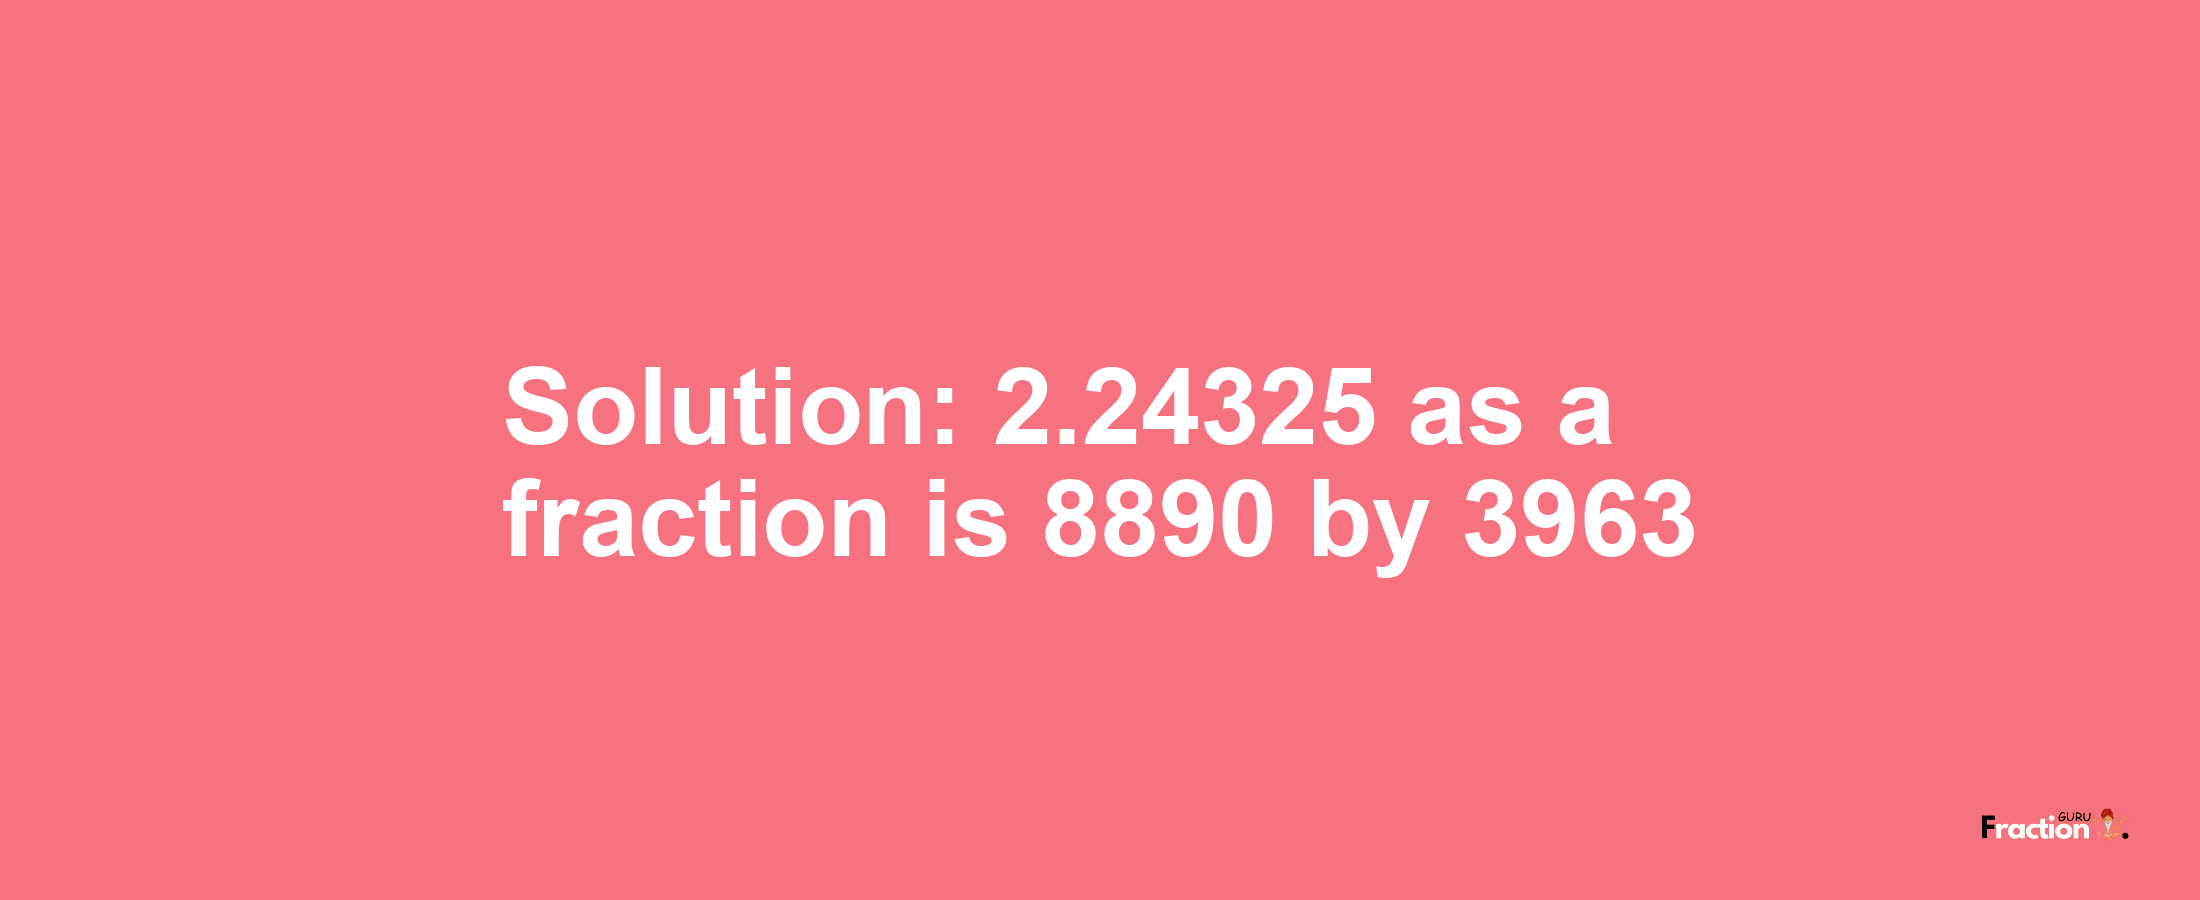 Solution:2.24325 as a fraction is 8890/3963